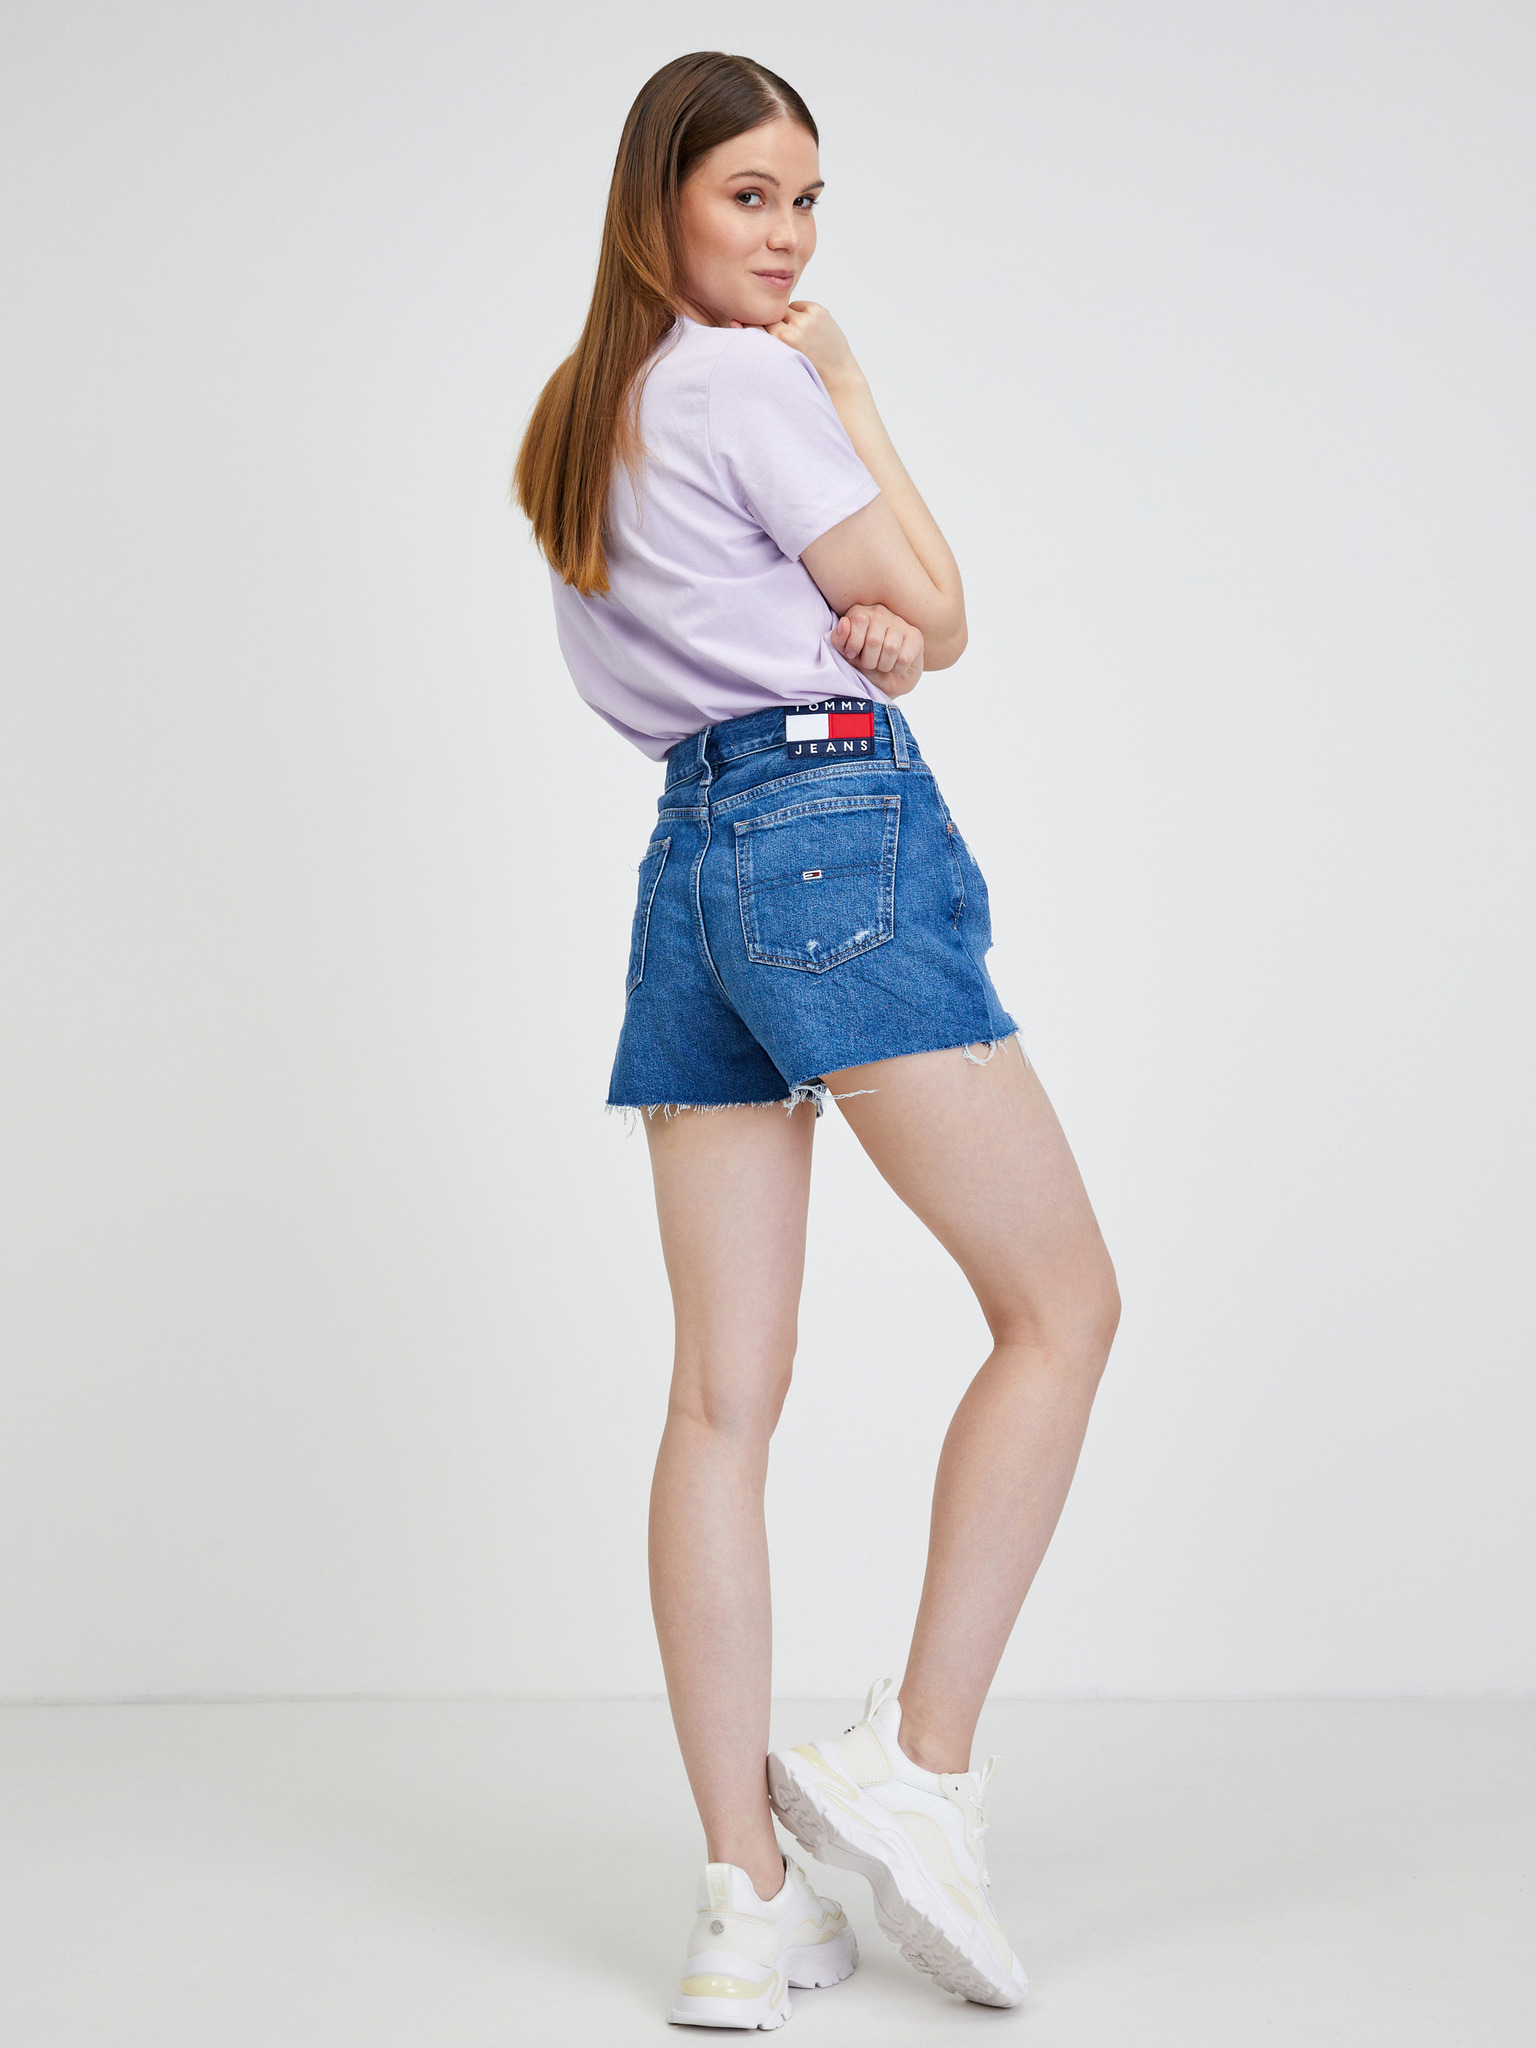 Hot Pants Jeans Photos and Images | Shutterstock-cheohanoi.vn